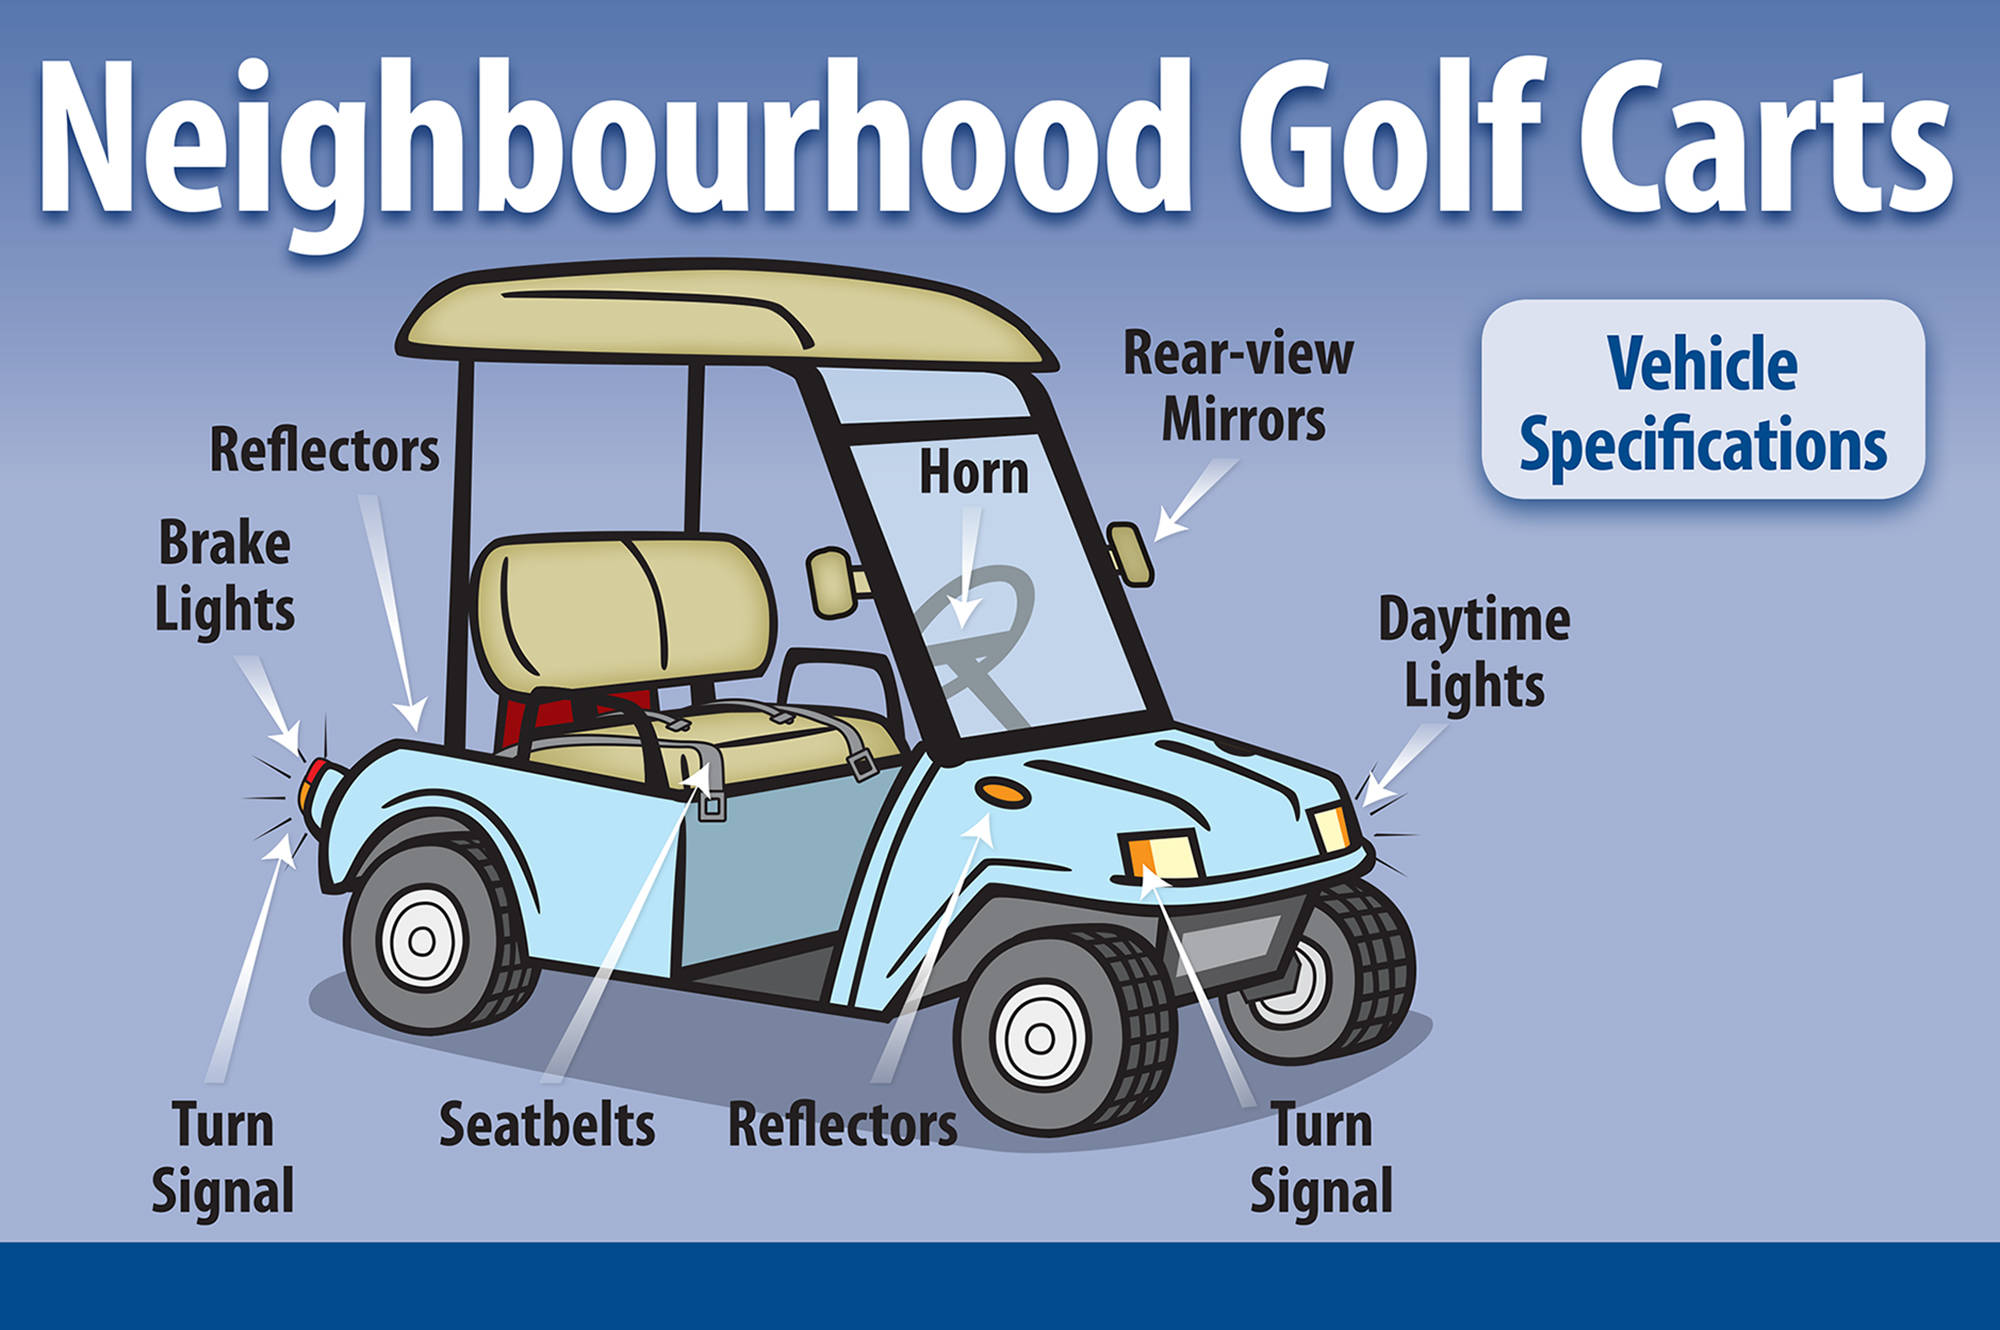 The BC government provided a graphic of the equipment a golf cart will need to drive on the streets.- Image credit: BC Provincial Government.